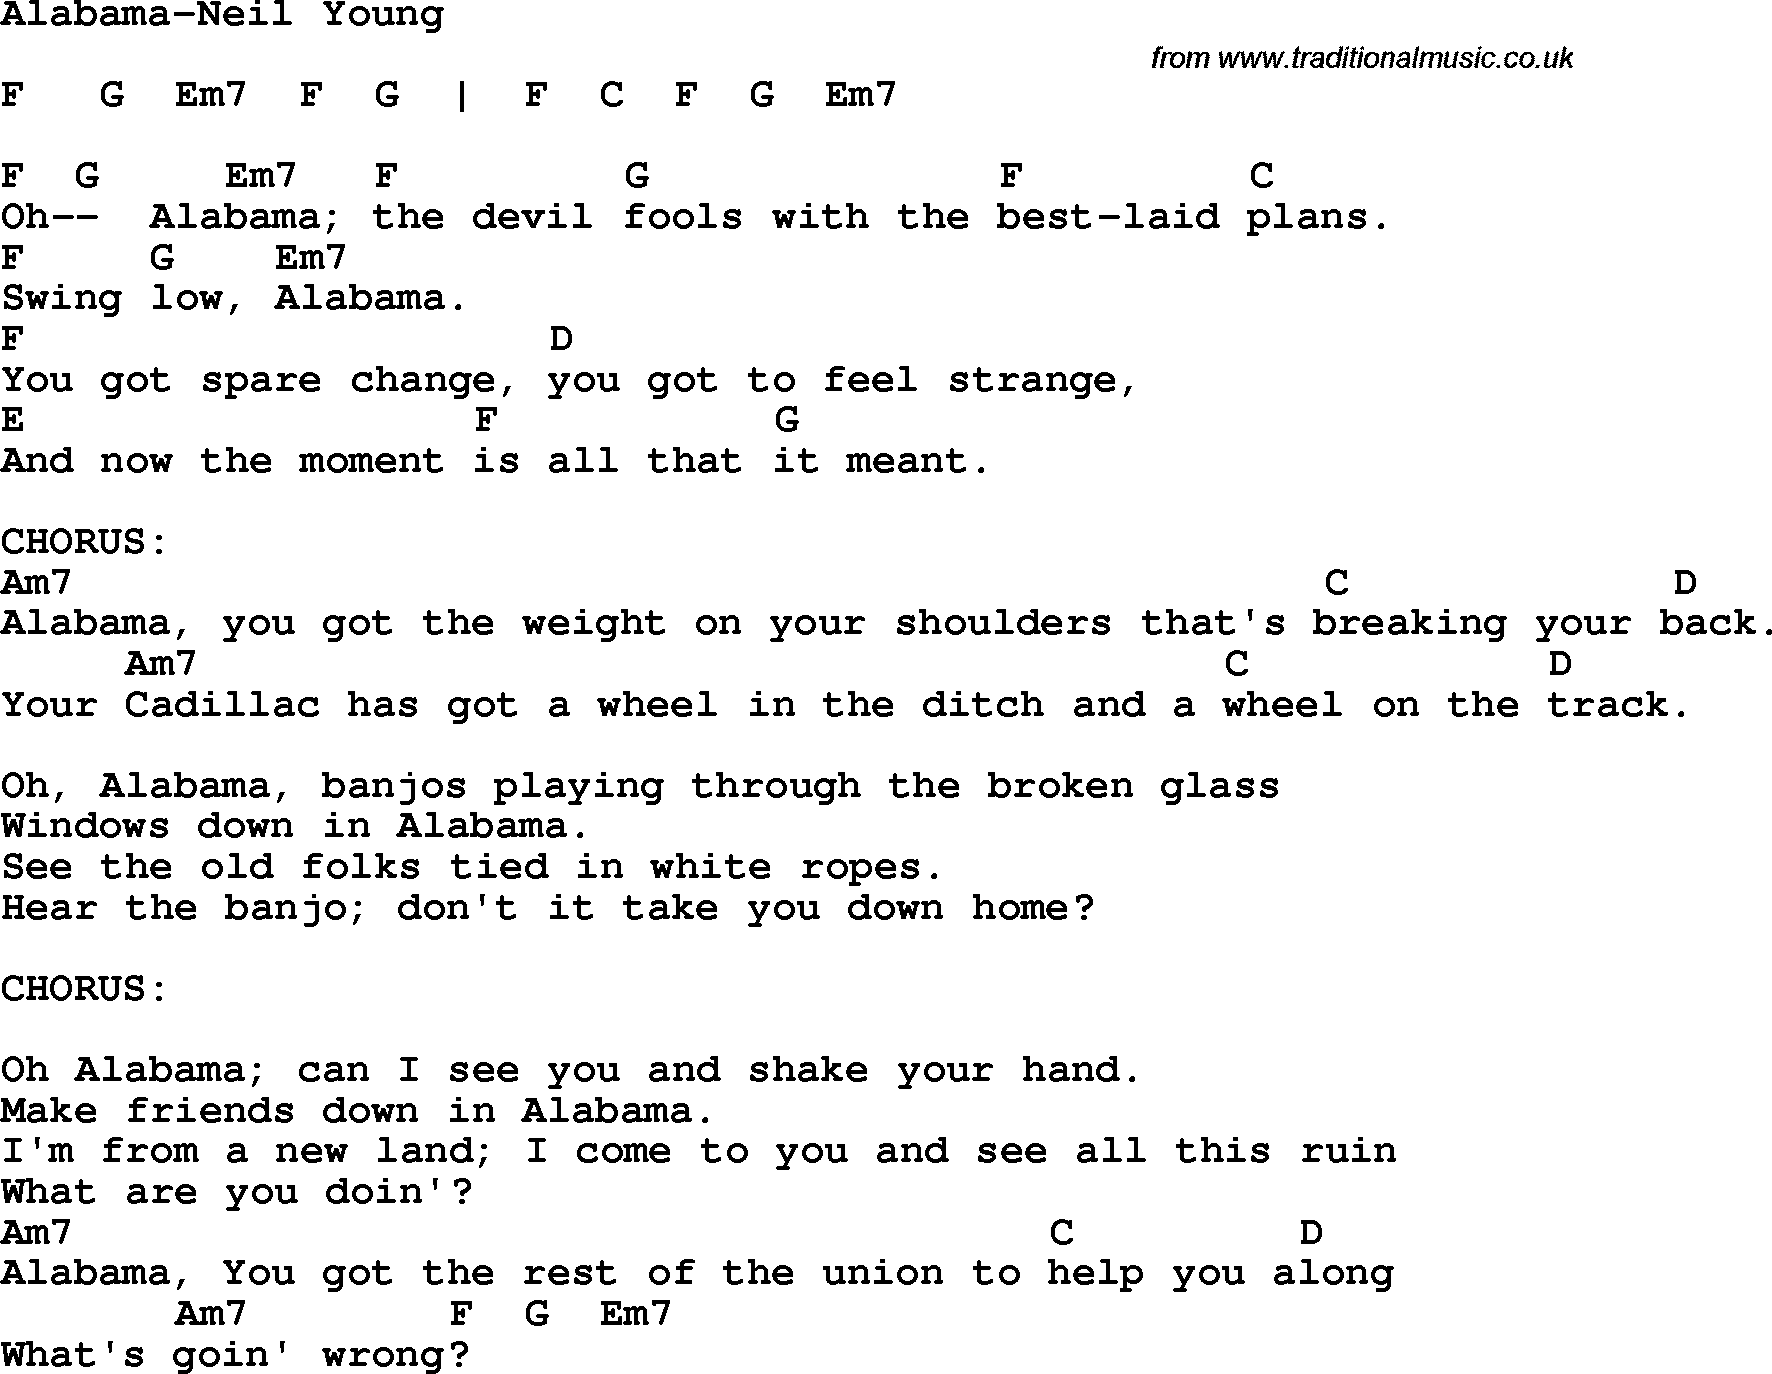 Protest Song Alabama-Neil Young lyrics and chords